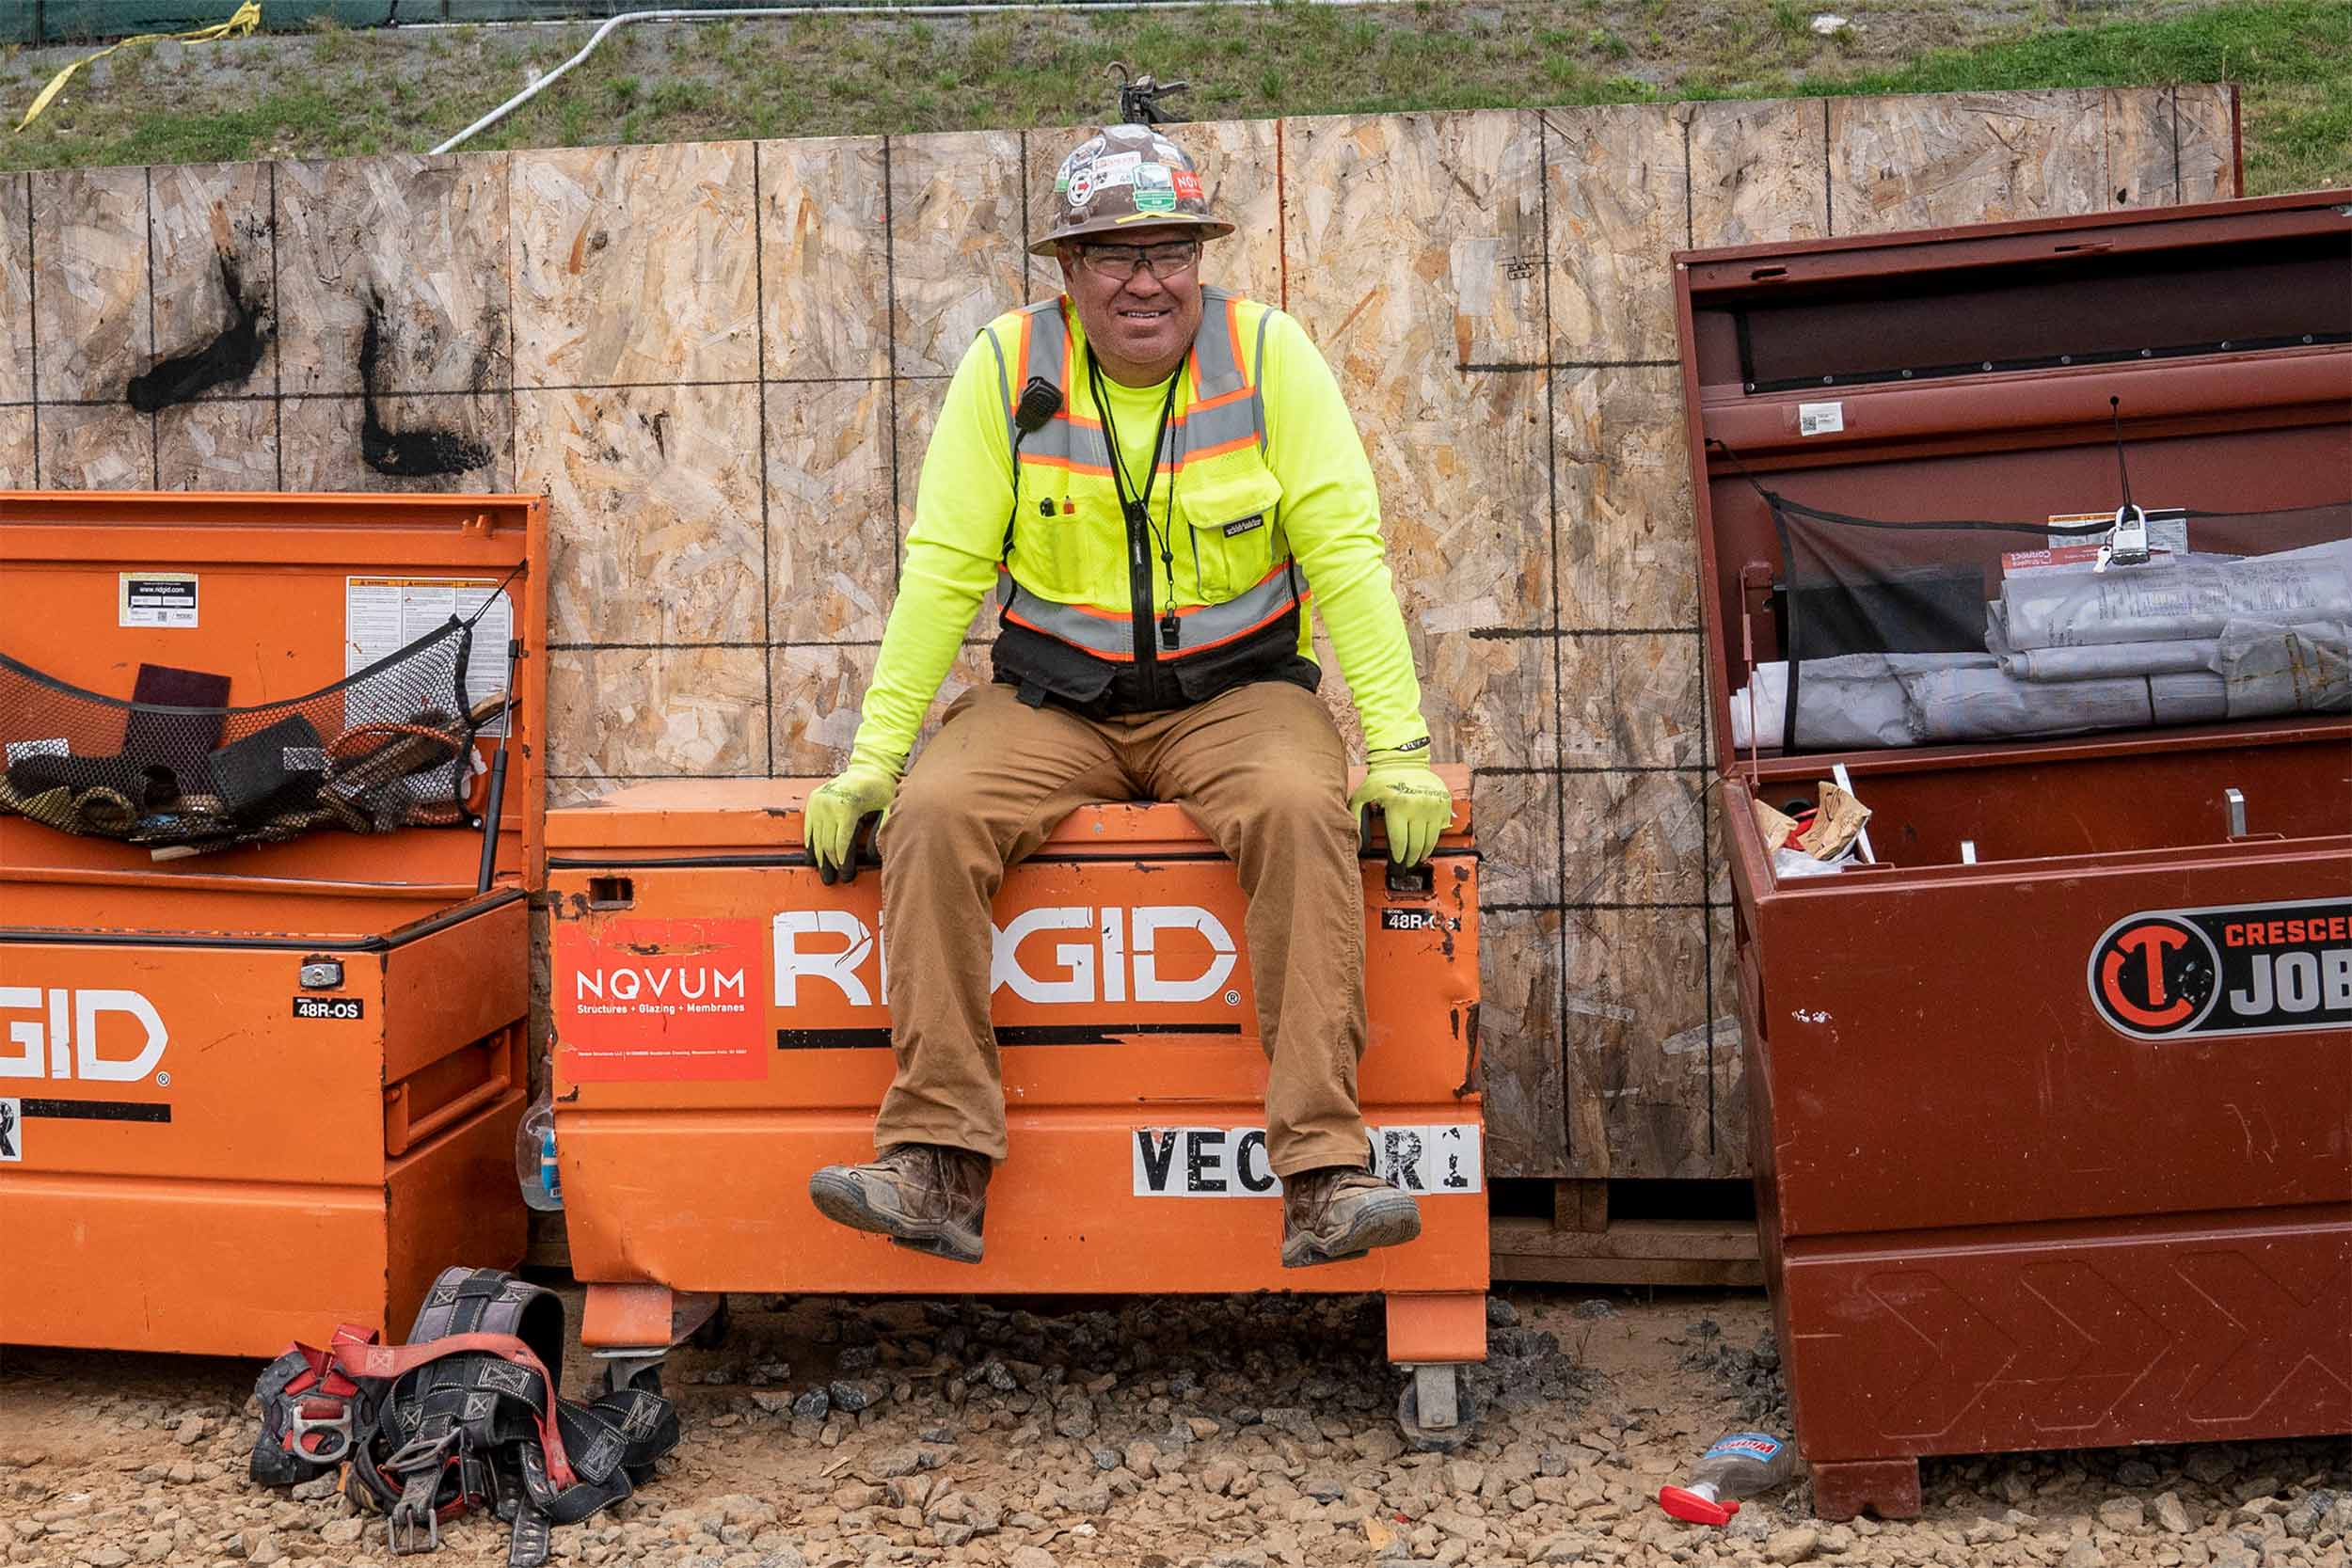 A worker sits on a large, orange toolbox in front of a sheet of OSB